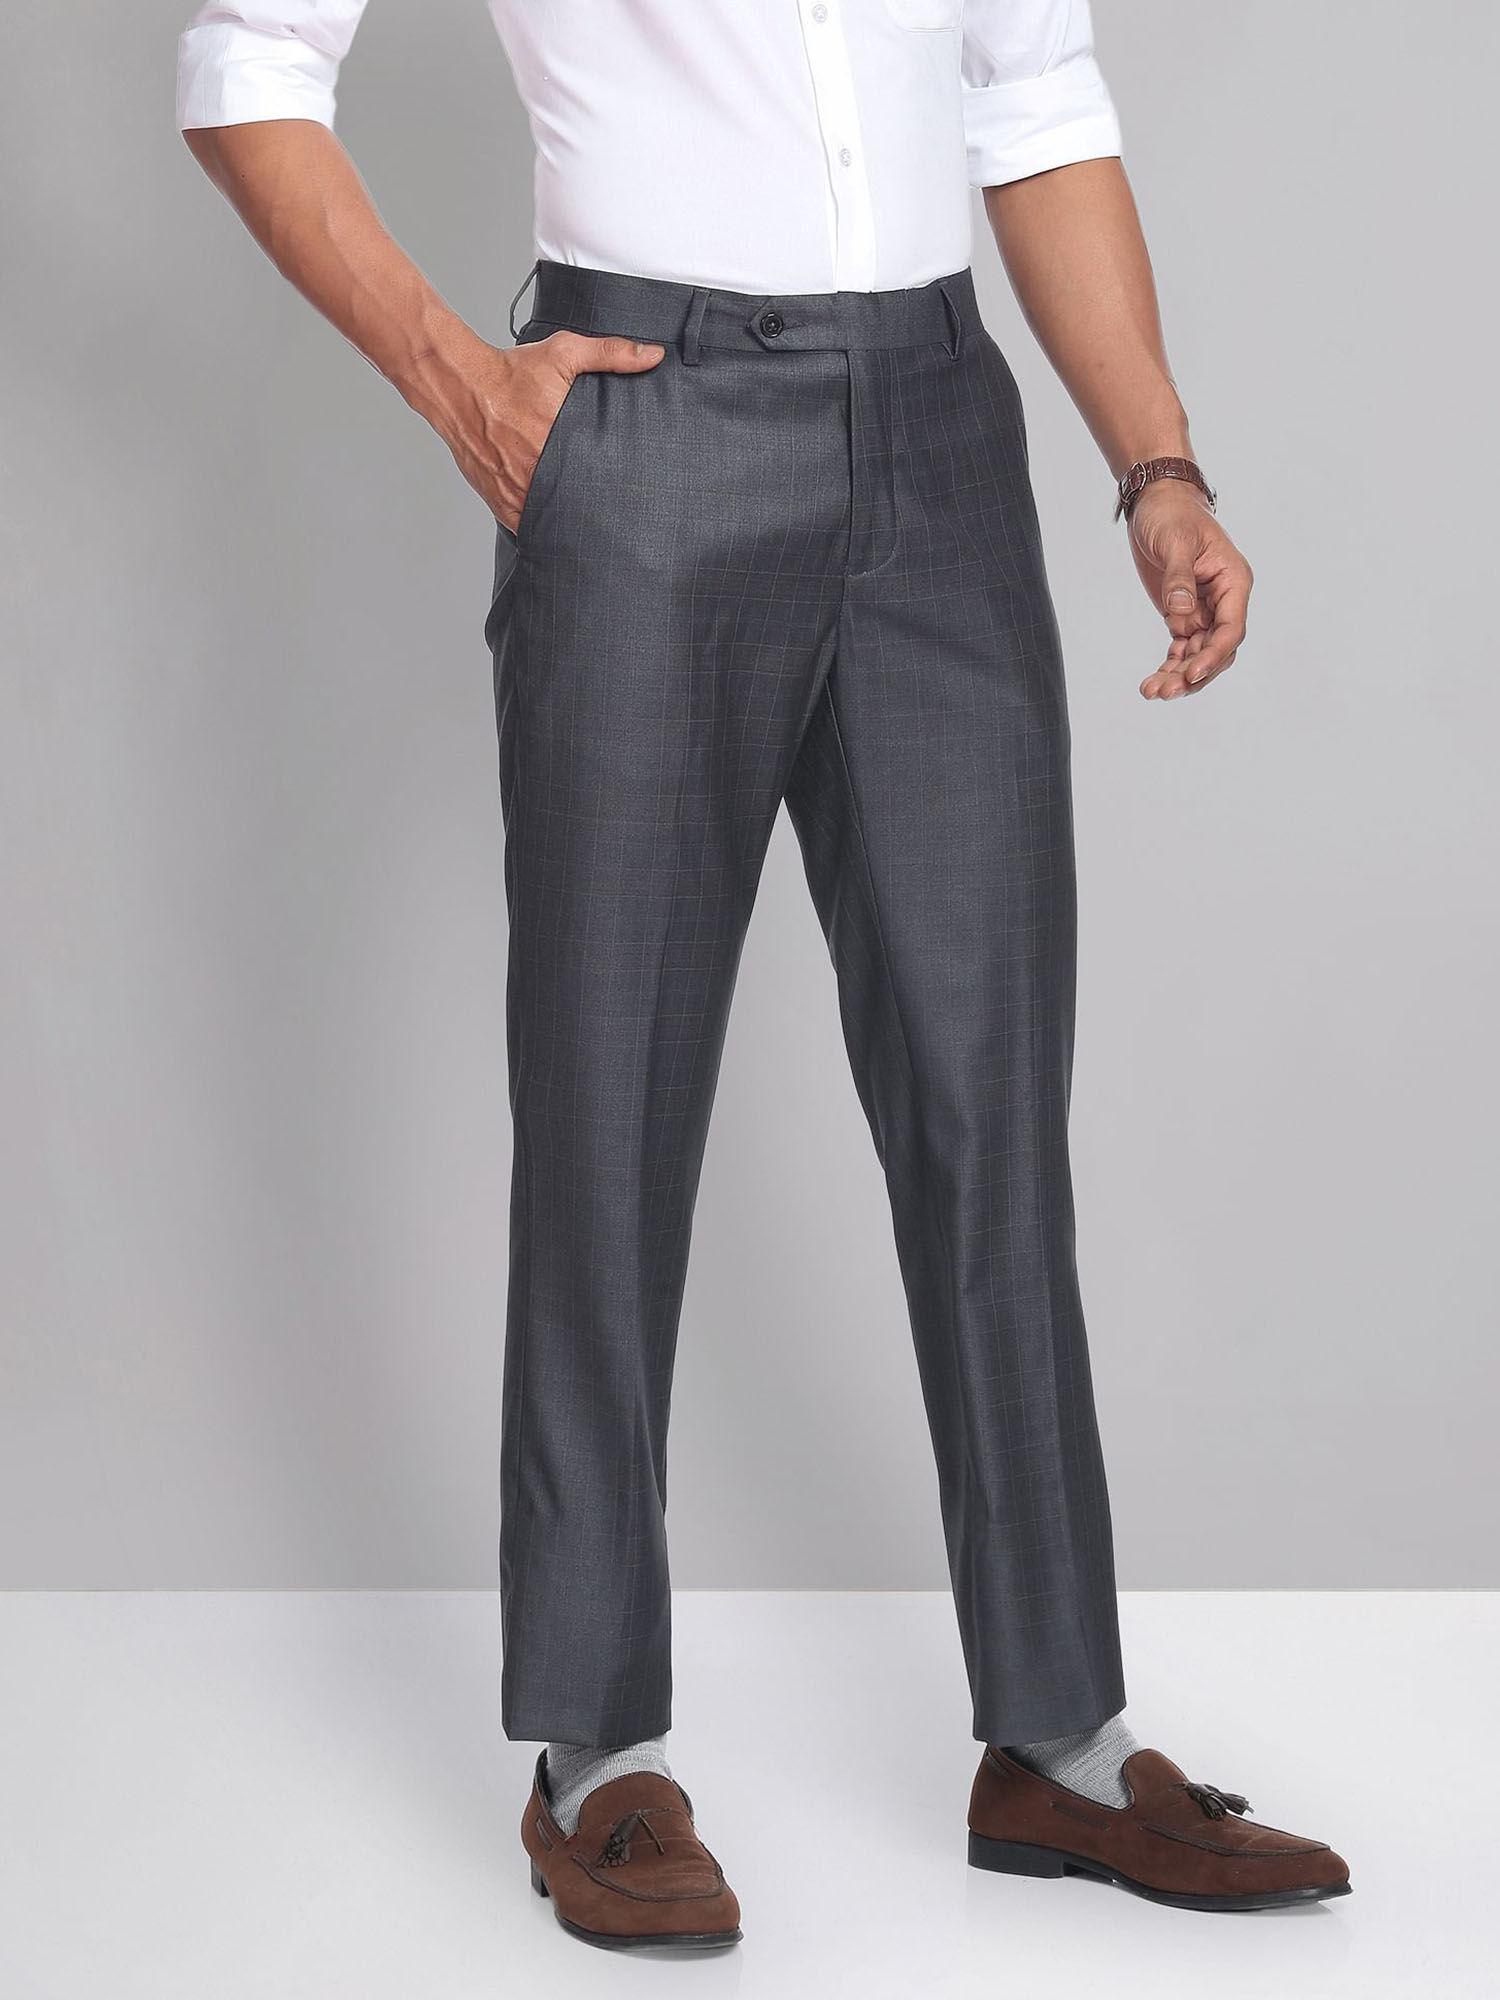 graph-check-patterned-twill-formal-trousers-grey